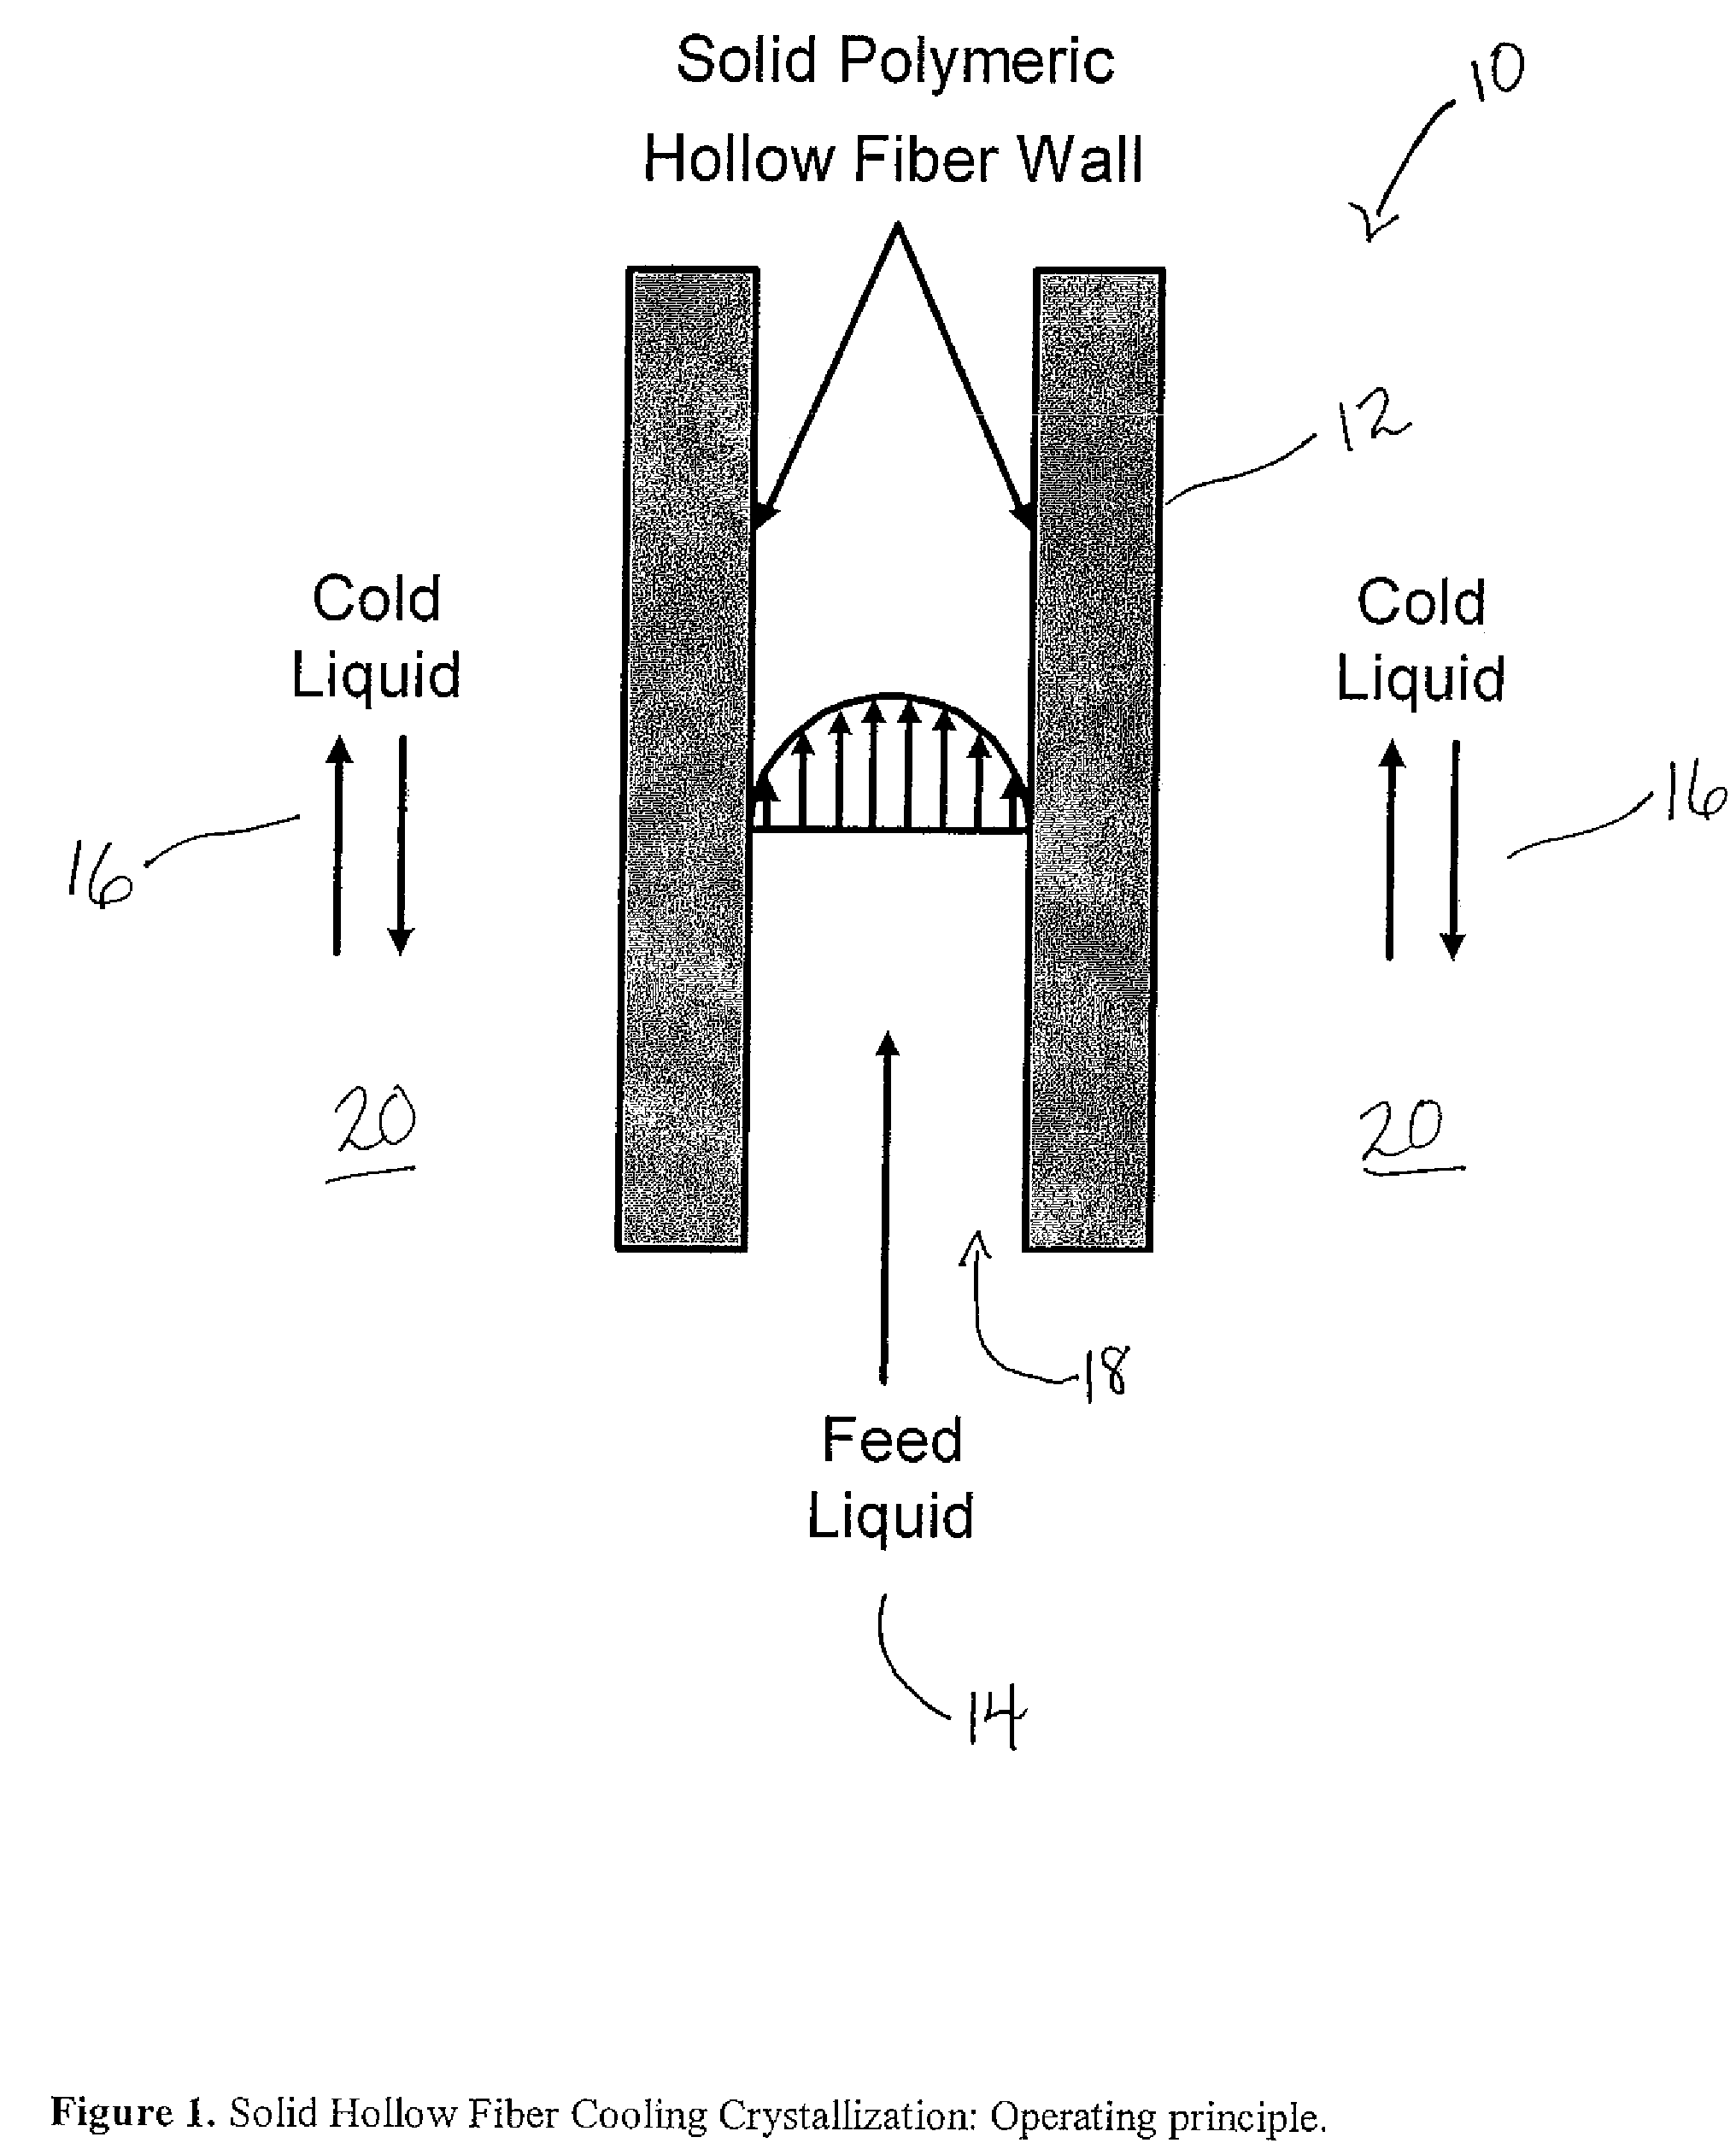 Solid hollow fiber cooling crystallization systems and methods